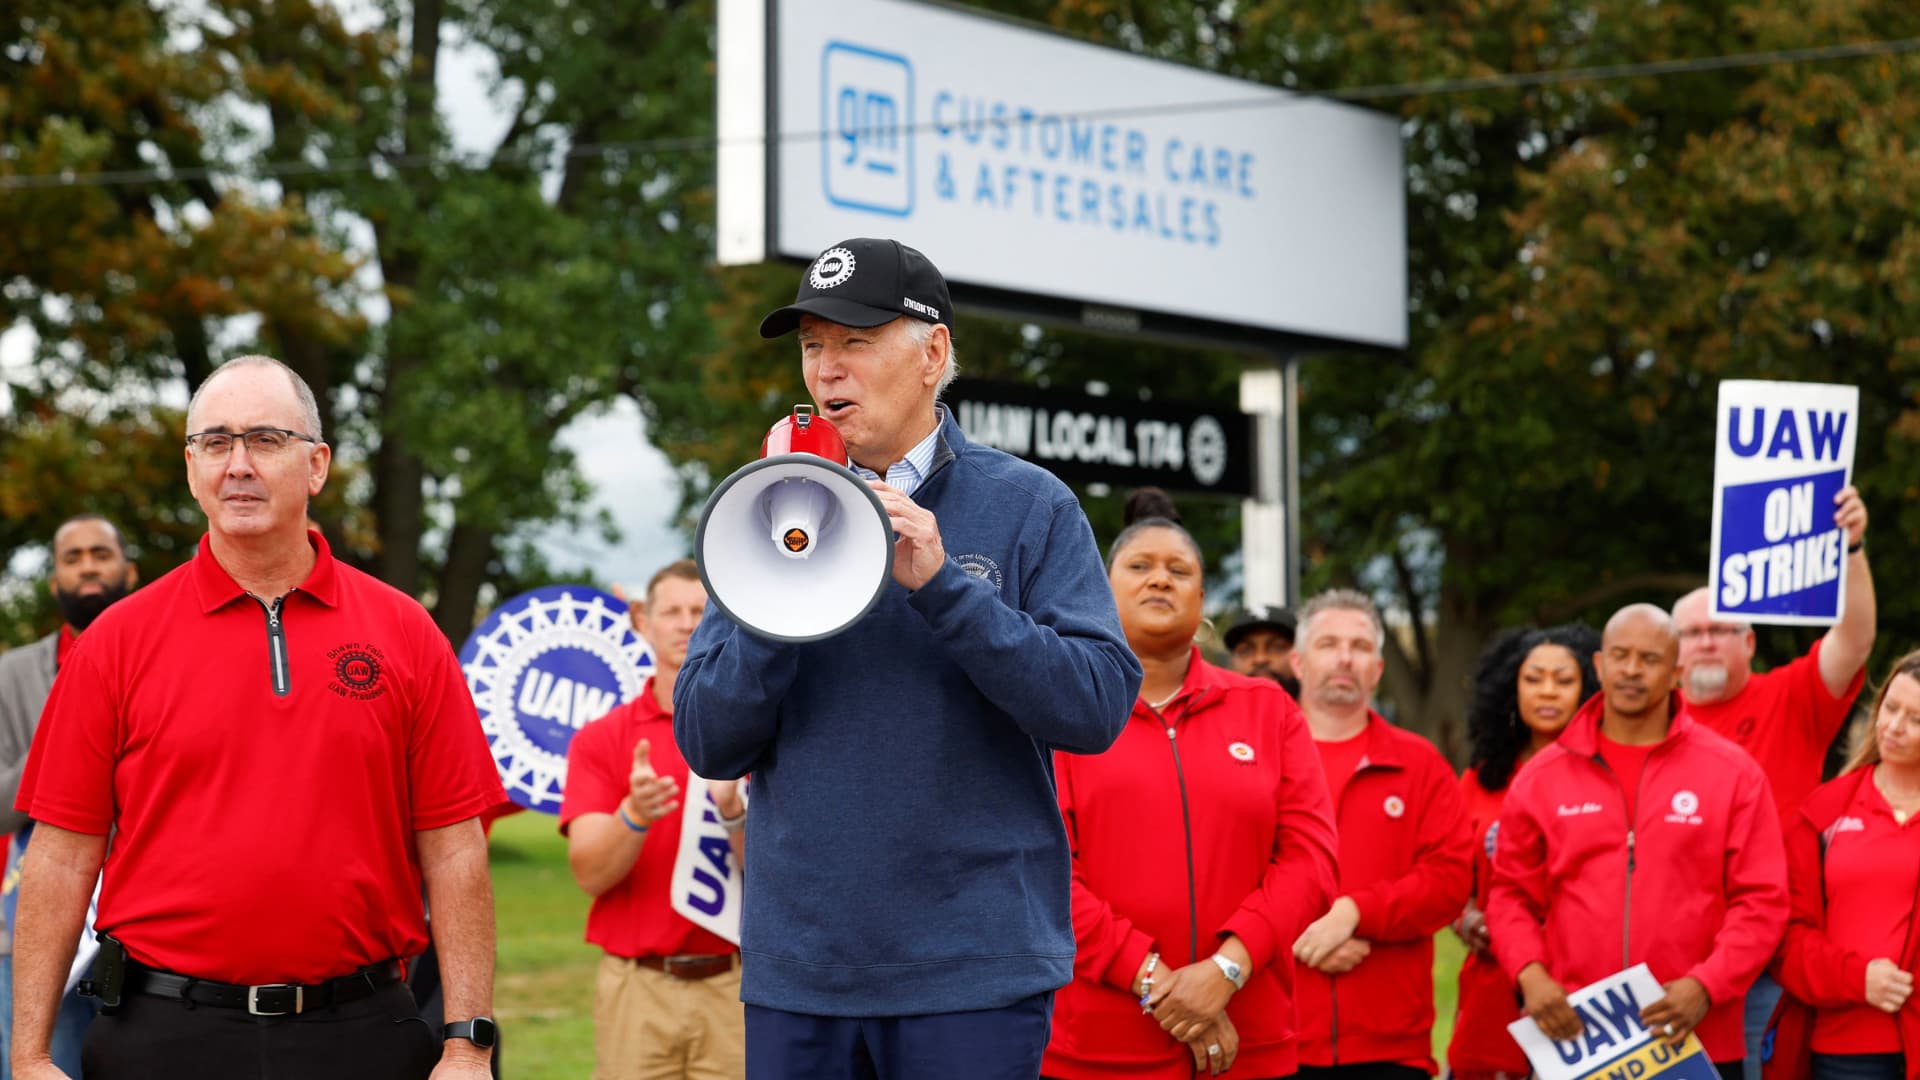 Biden stands with striking UAW autoworkers in Michigan, supports big pay raise